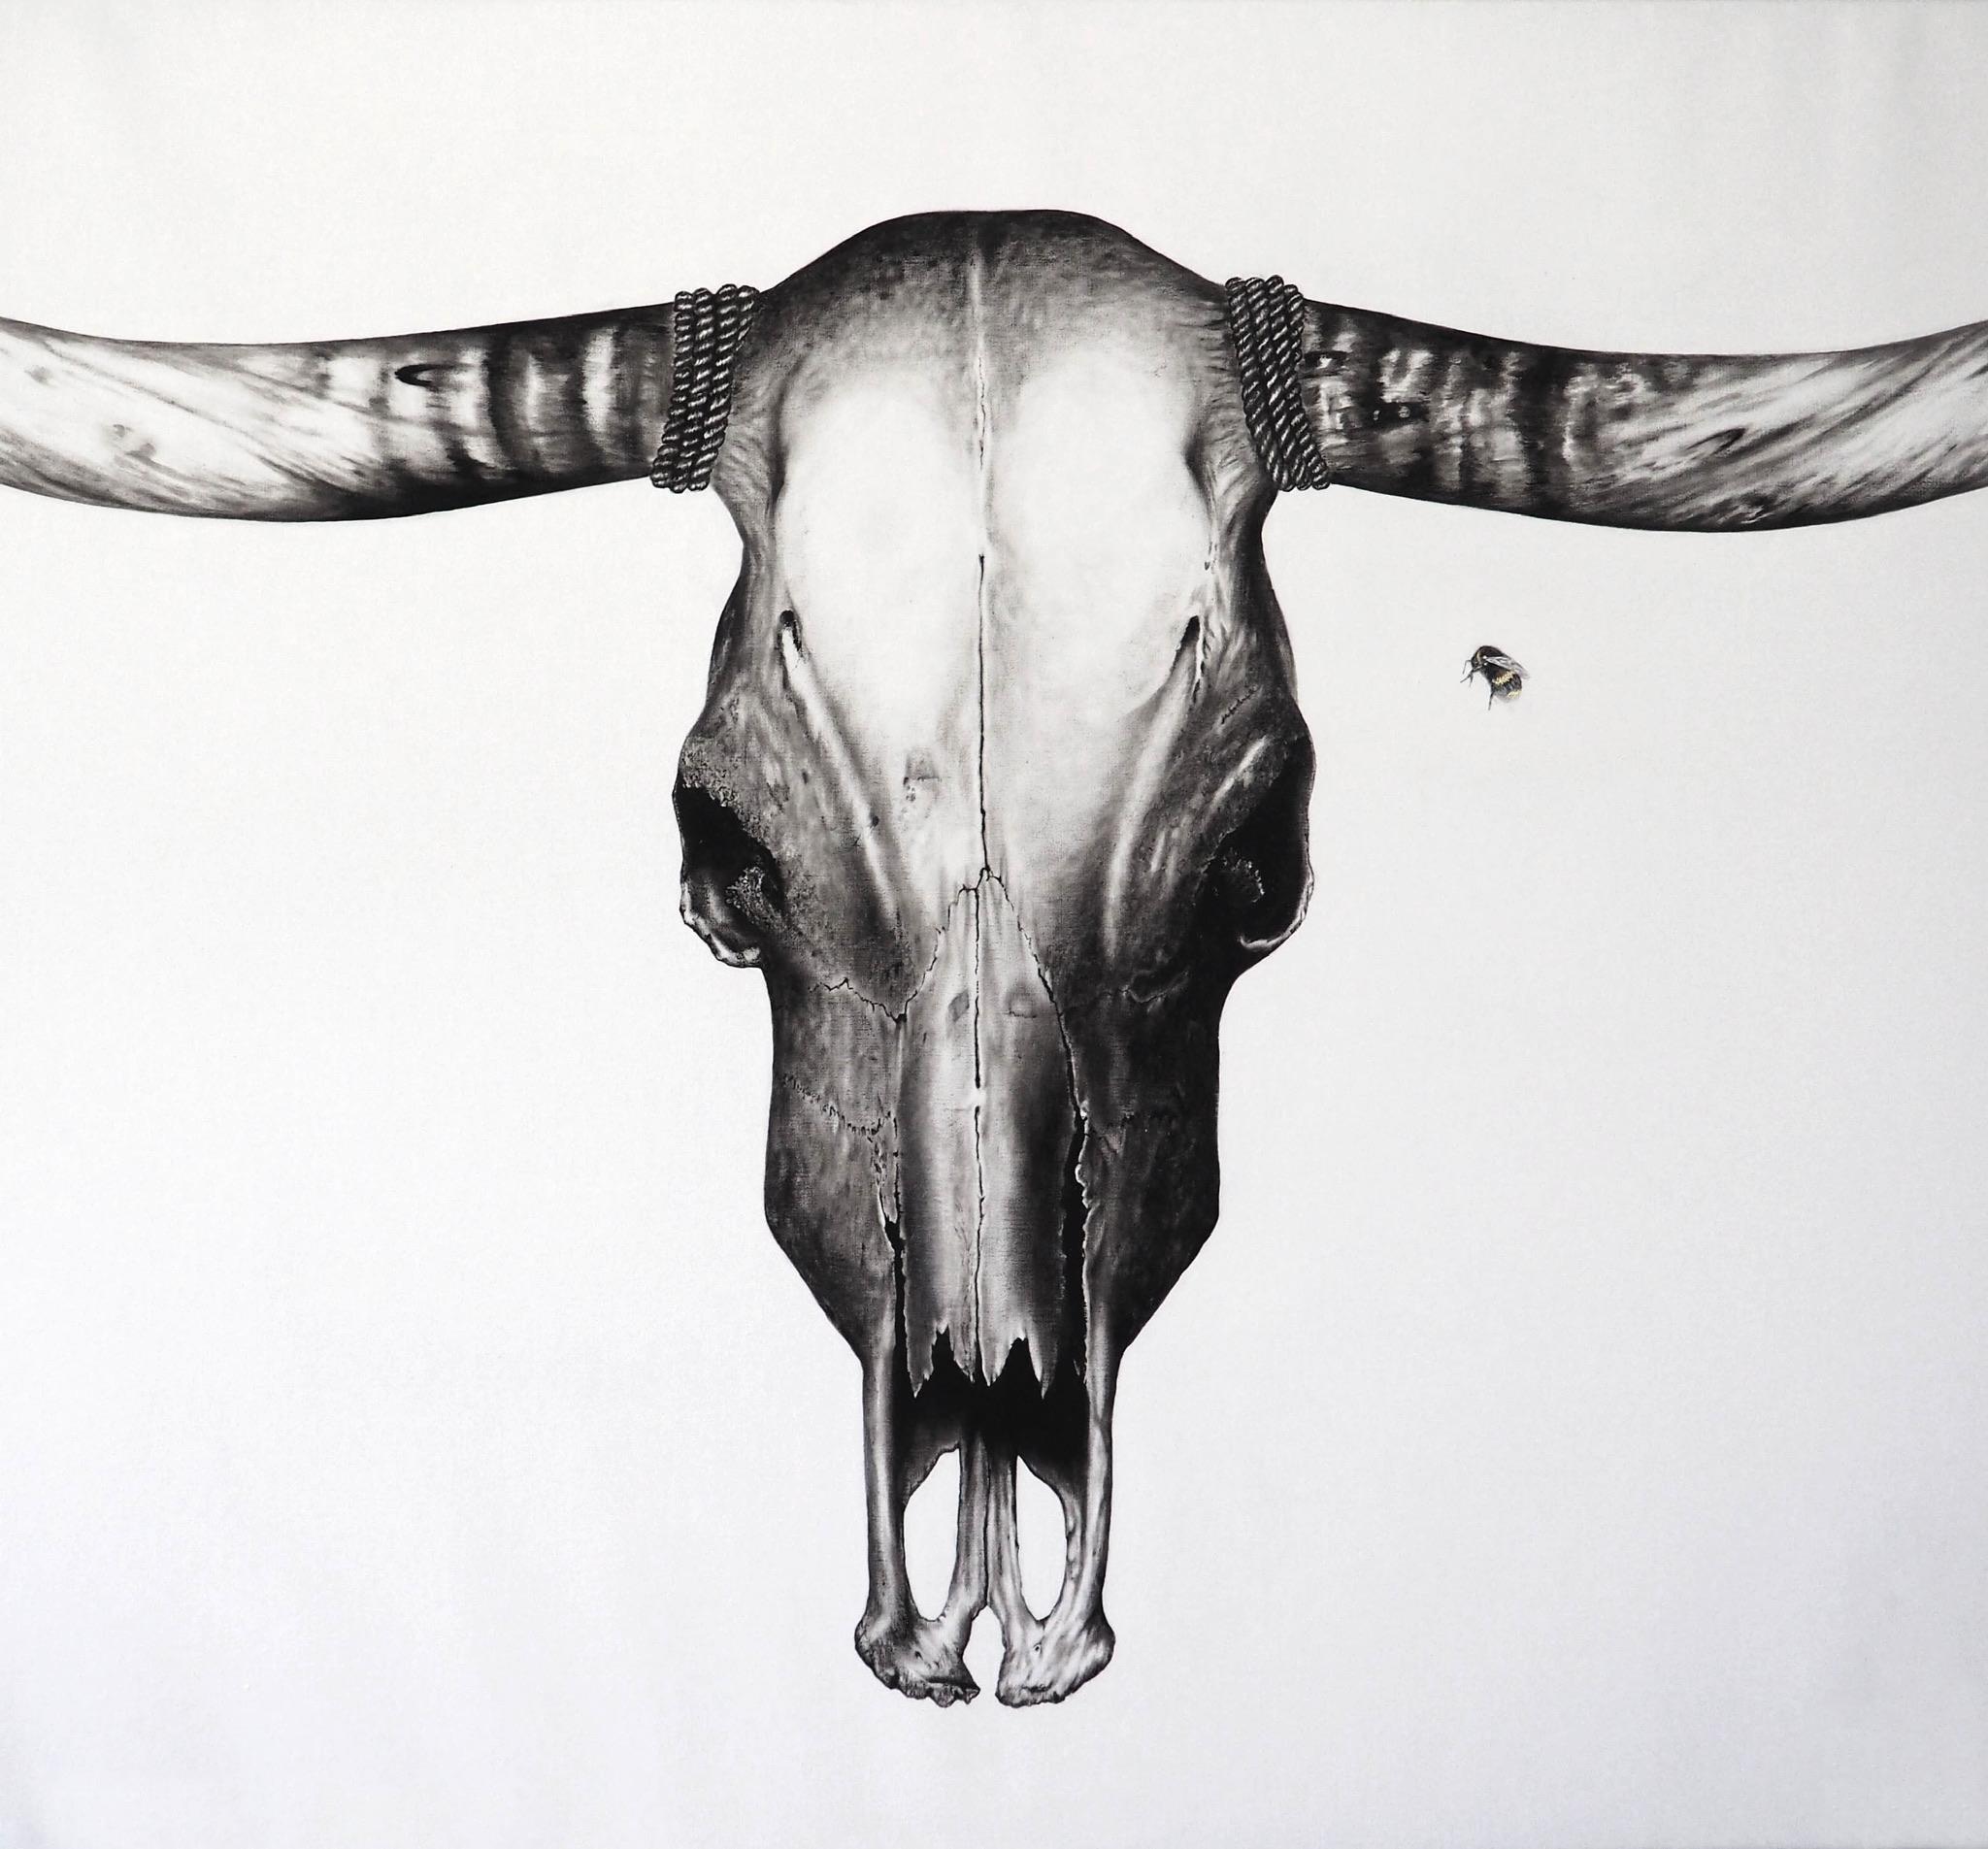 Elizabeth Waggett
Being and Nothingness
40 x 76 inches, framed
Oil on Belgian linen with 24k gold
This piece is unique
Signed by artist
Beautifully framed in black

Elizabeth Waggett
Waggett
drawing
original drawing
longhorn
animal
bees